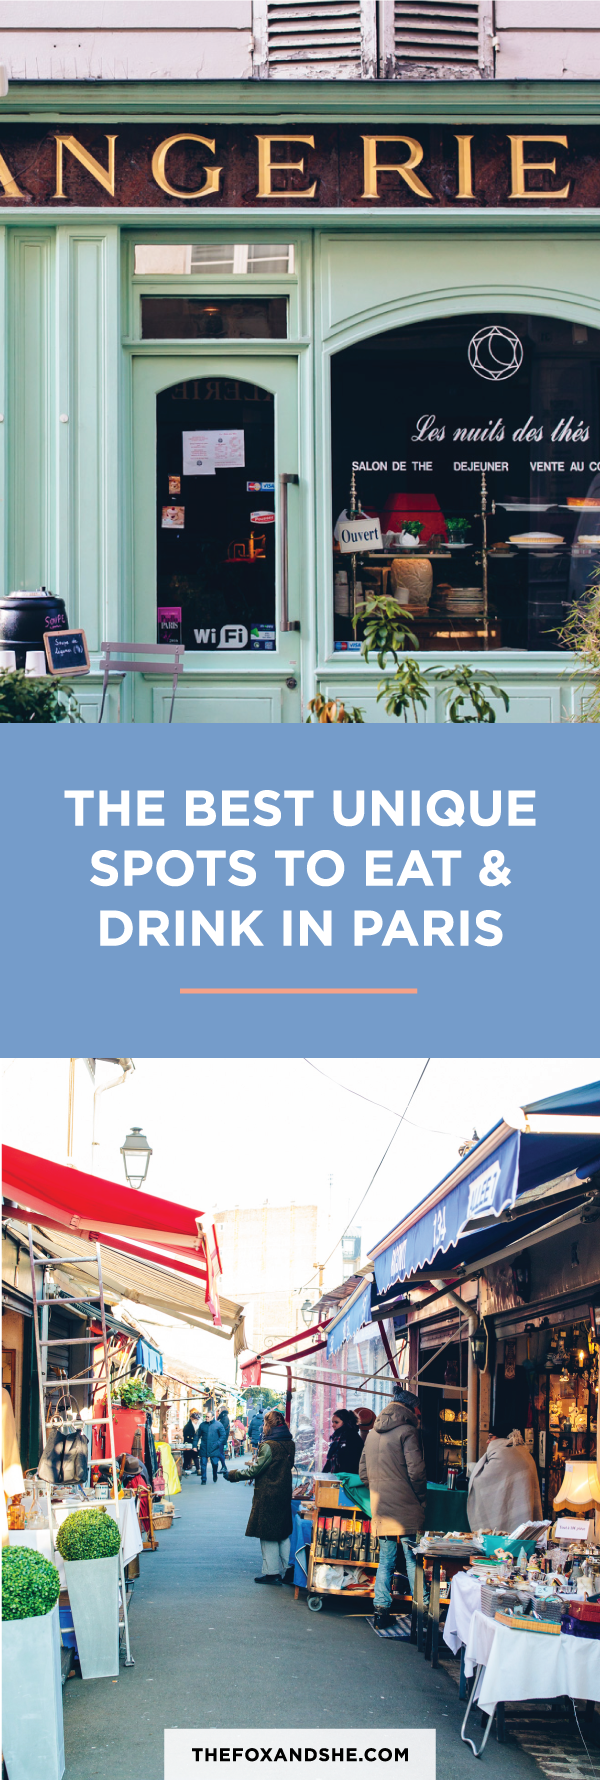 restaurants in paris, where to eat and drink in Paris